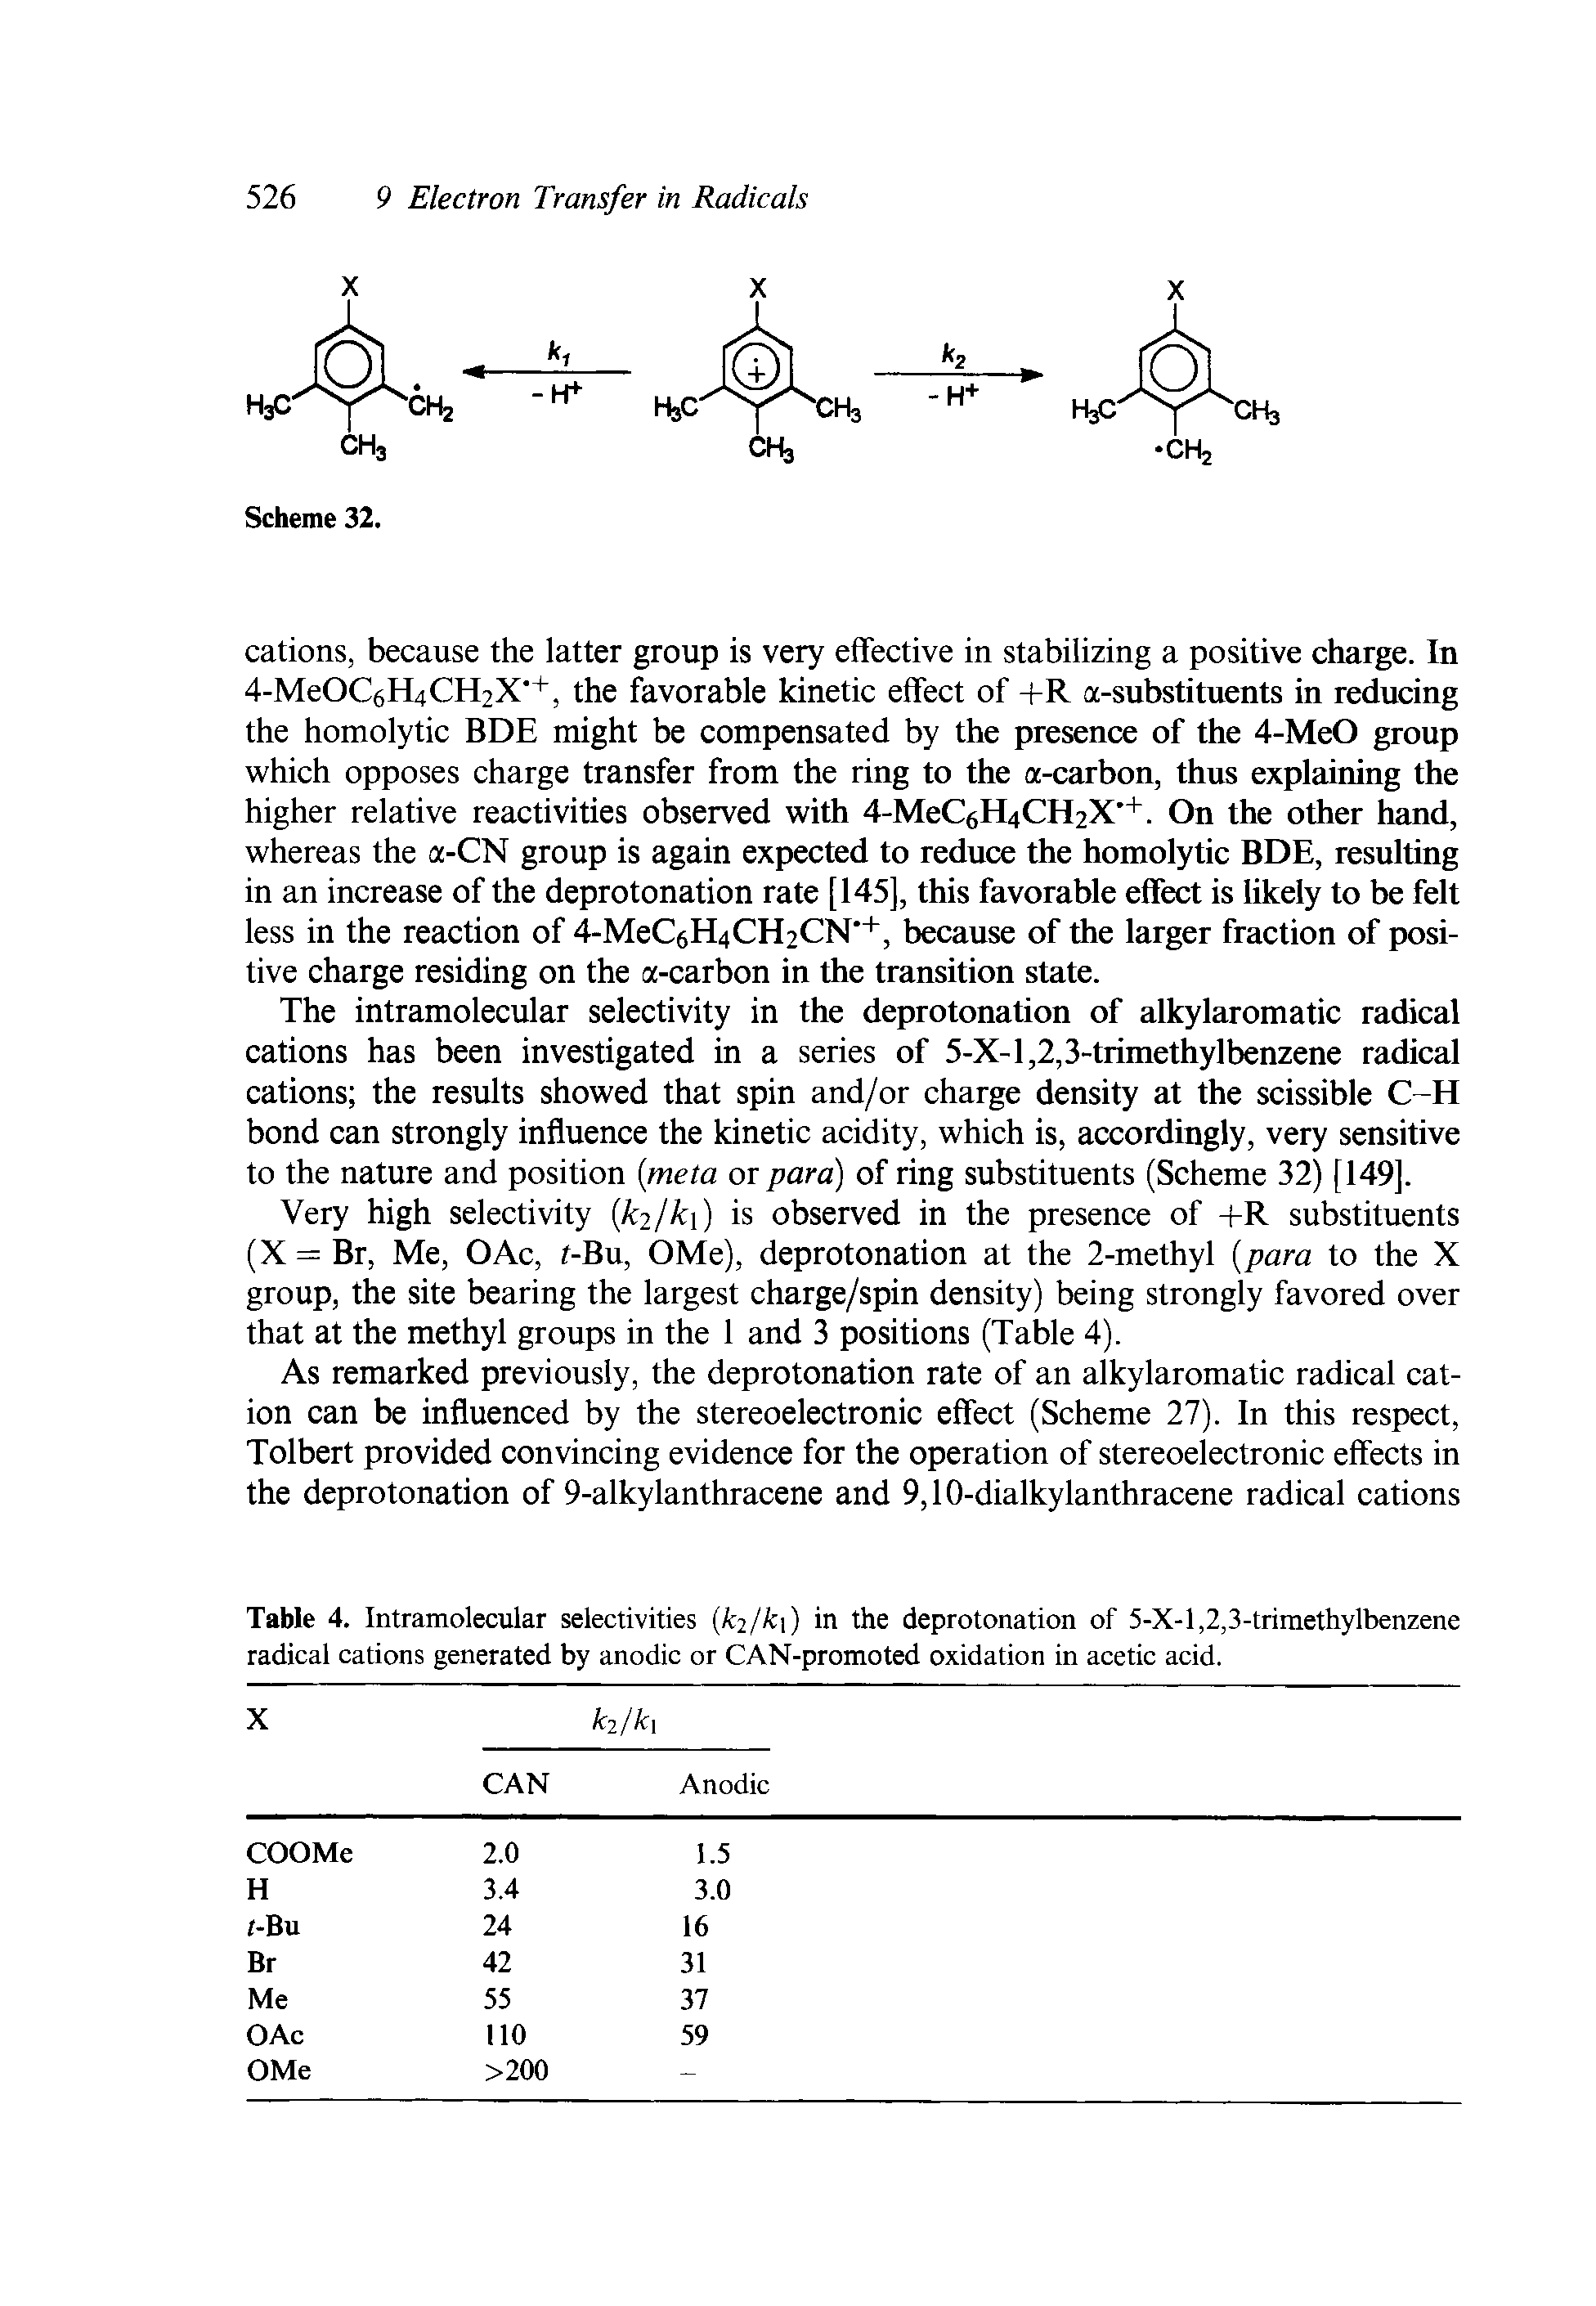 Table 4. Intramolecular selectivities ki/kx) in the deprotonation of 5-X-l,2,3-trimethylbenzene radical cations generated by anodic or CAN-promoted oxidation in acetic acid.